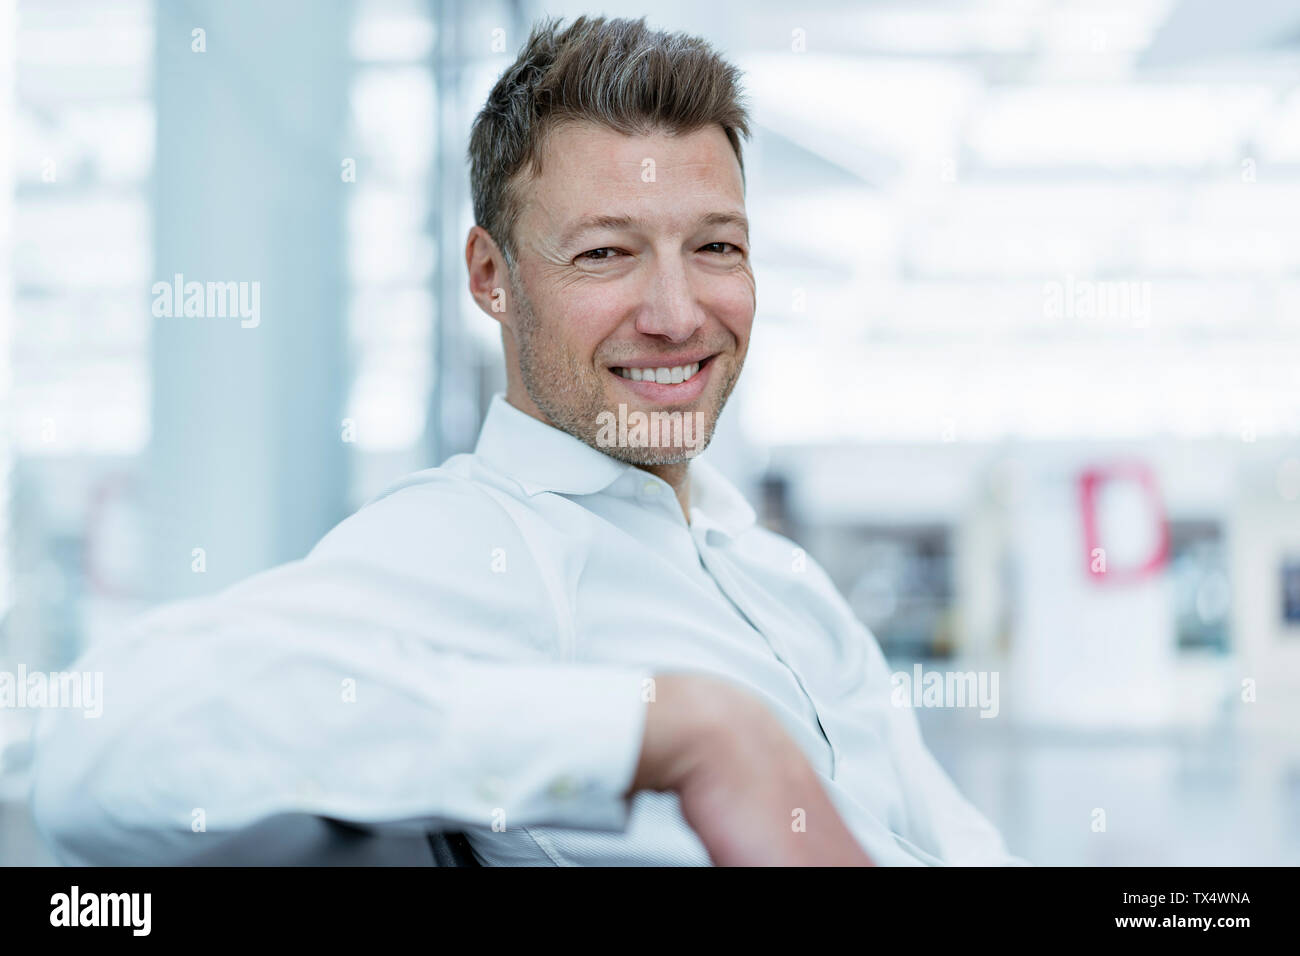 Portrait of smiling businessman sitting in waiting area Stock Photo